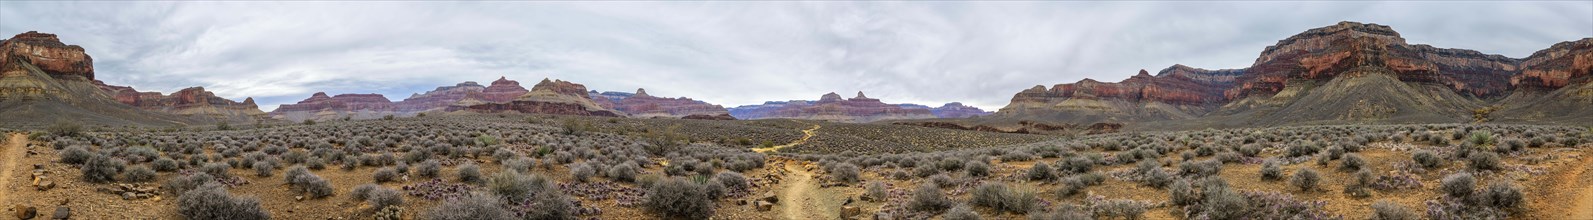 360-degree panorama from Plateau Point Trail in the gorge of the Grand Canyon to South Rim and North Rim